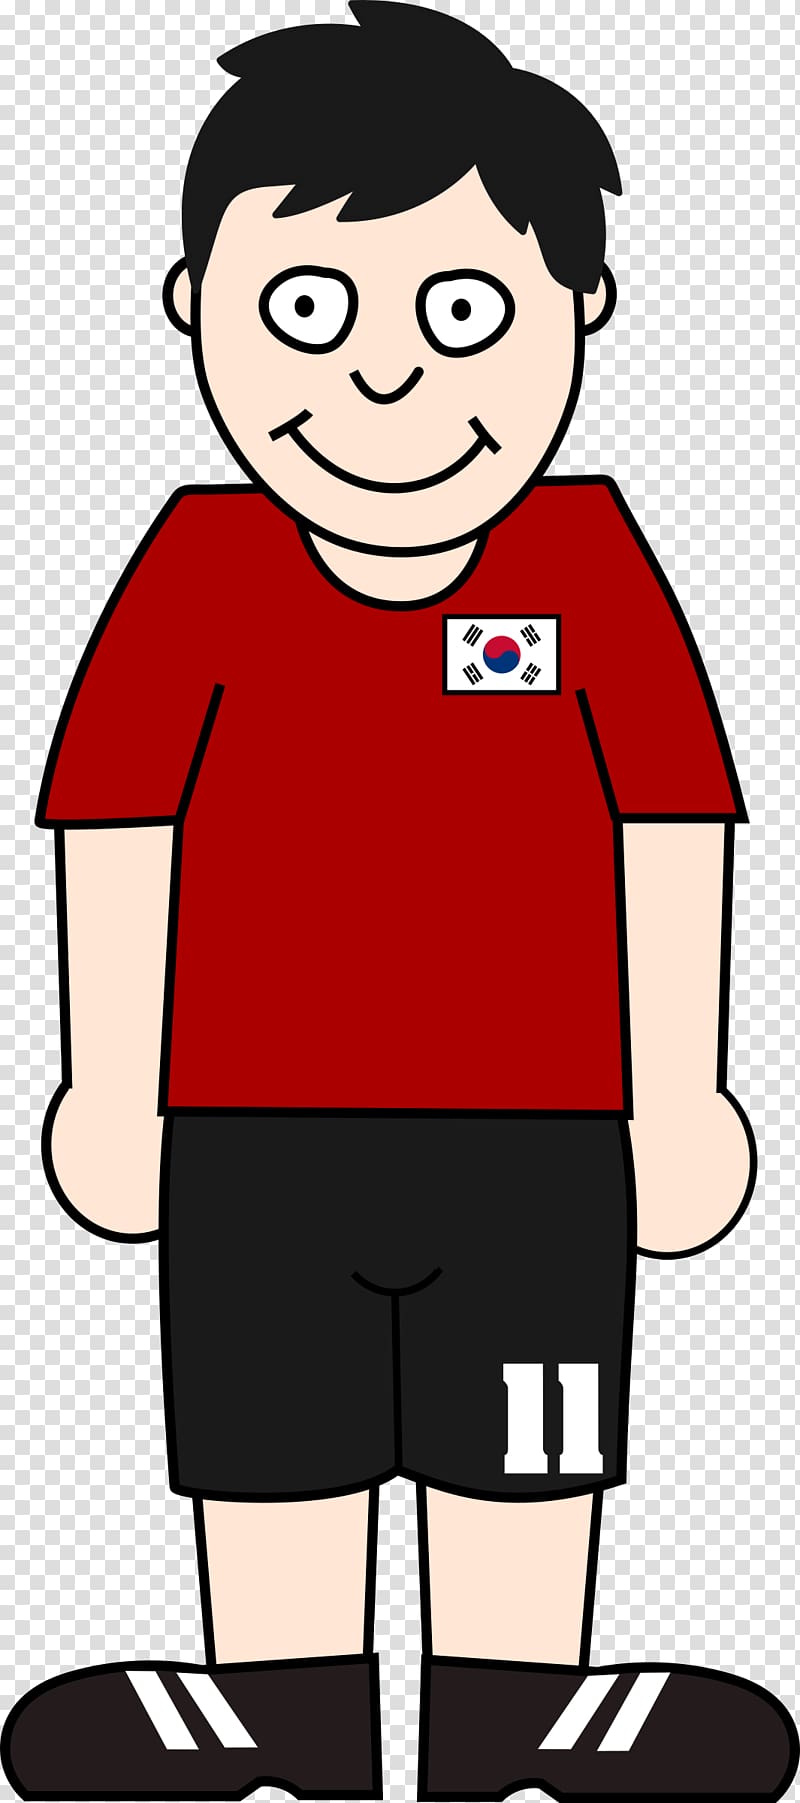 South Korea national football team 2018 World Cup Serbia national football team, SOUTH Korea FOOTBALL transparent background PNG clipart